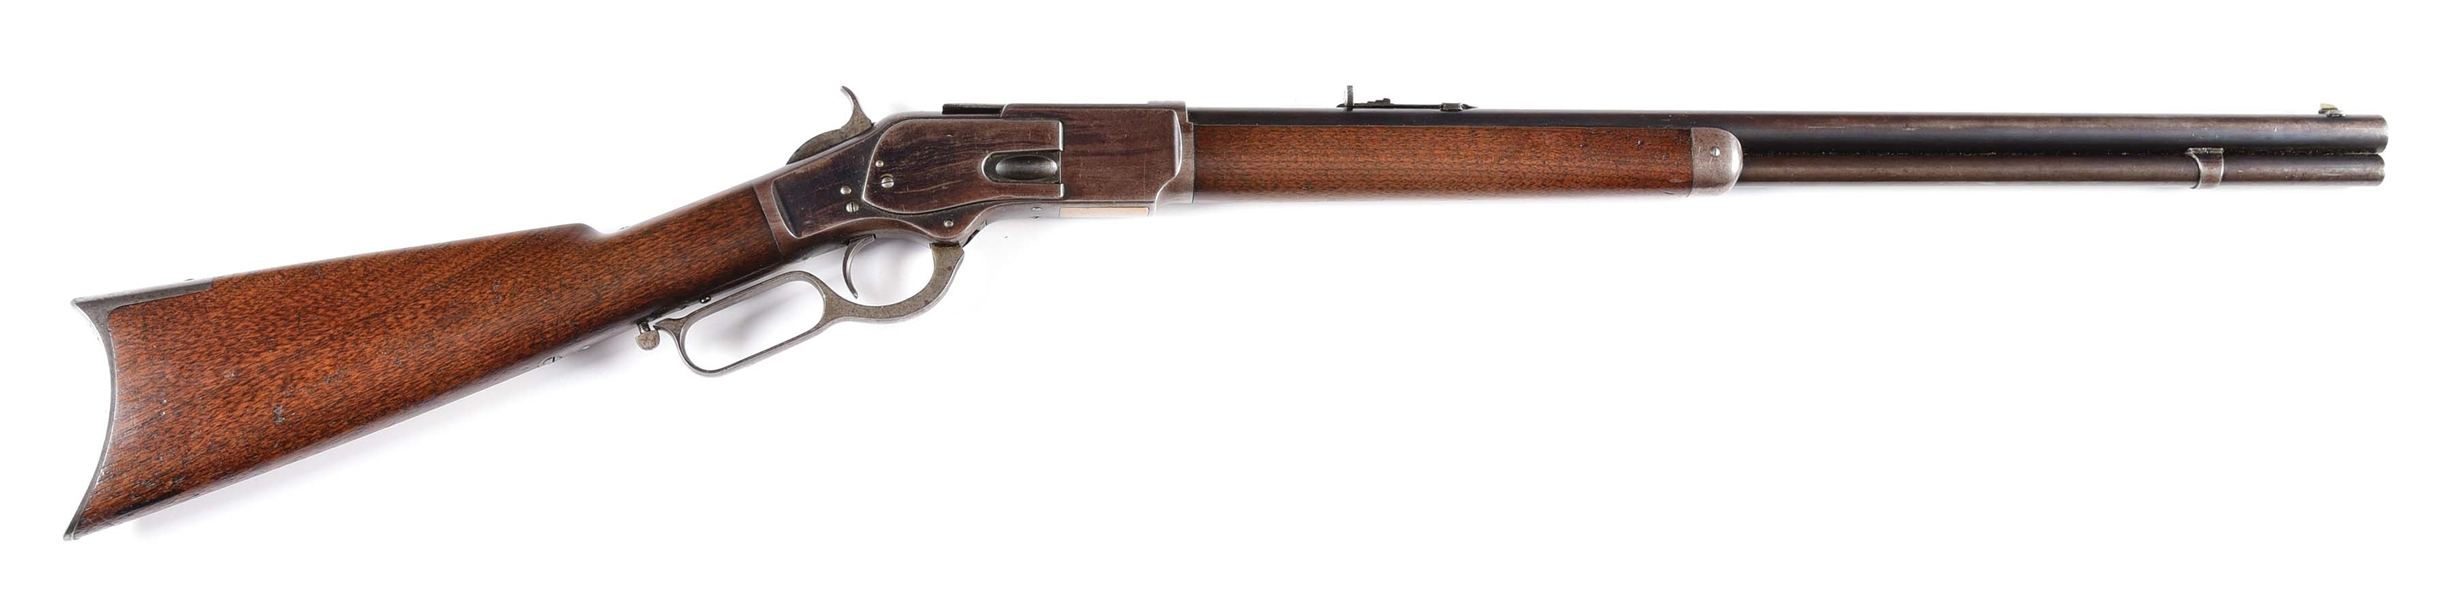 (A) WINCHESTER FIRST MODEL 1873 RIFLE (1875).